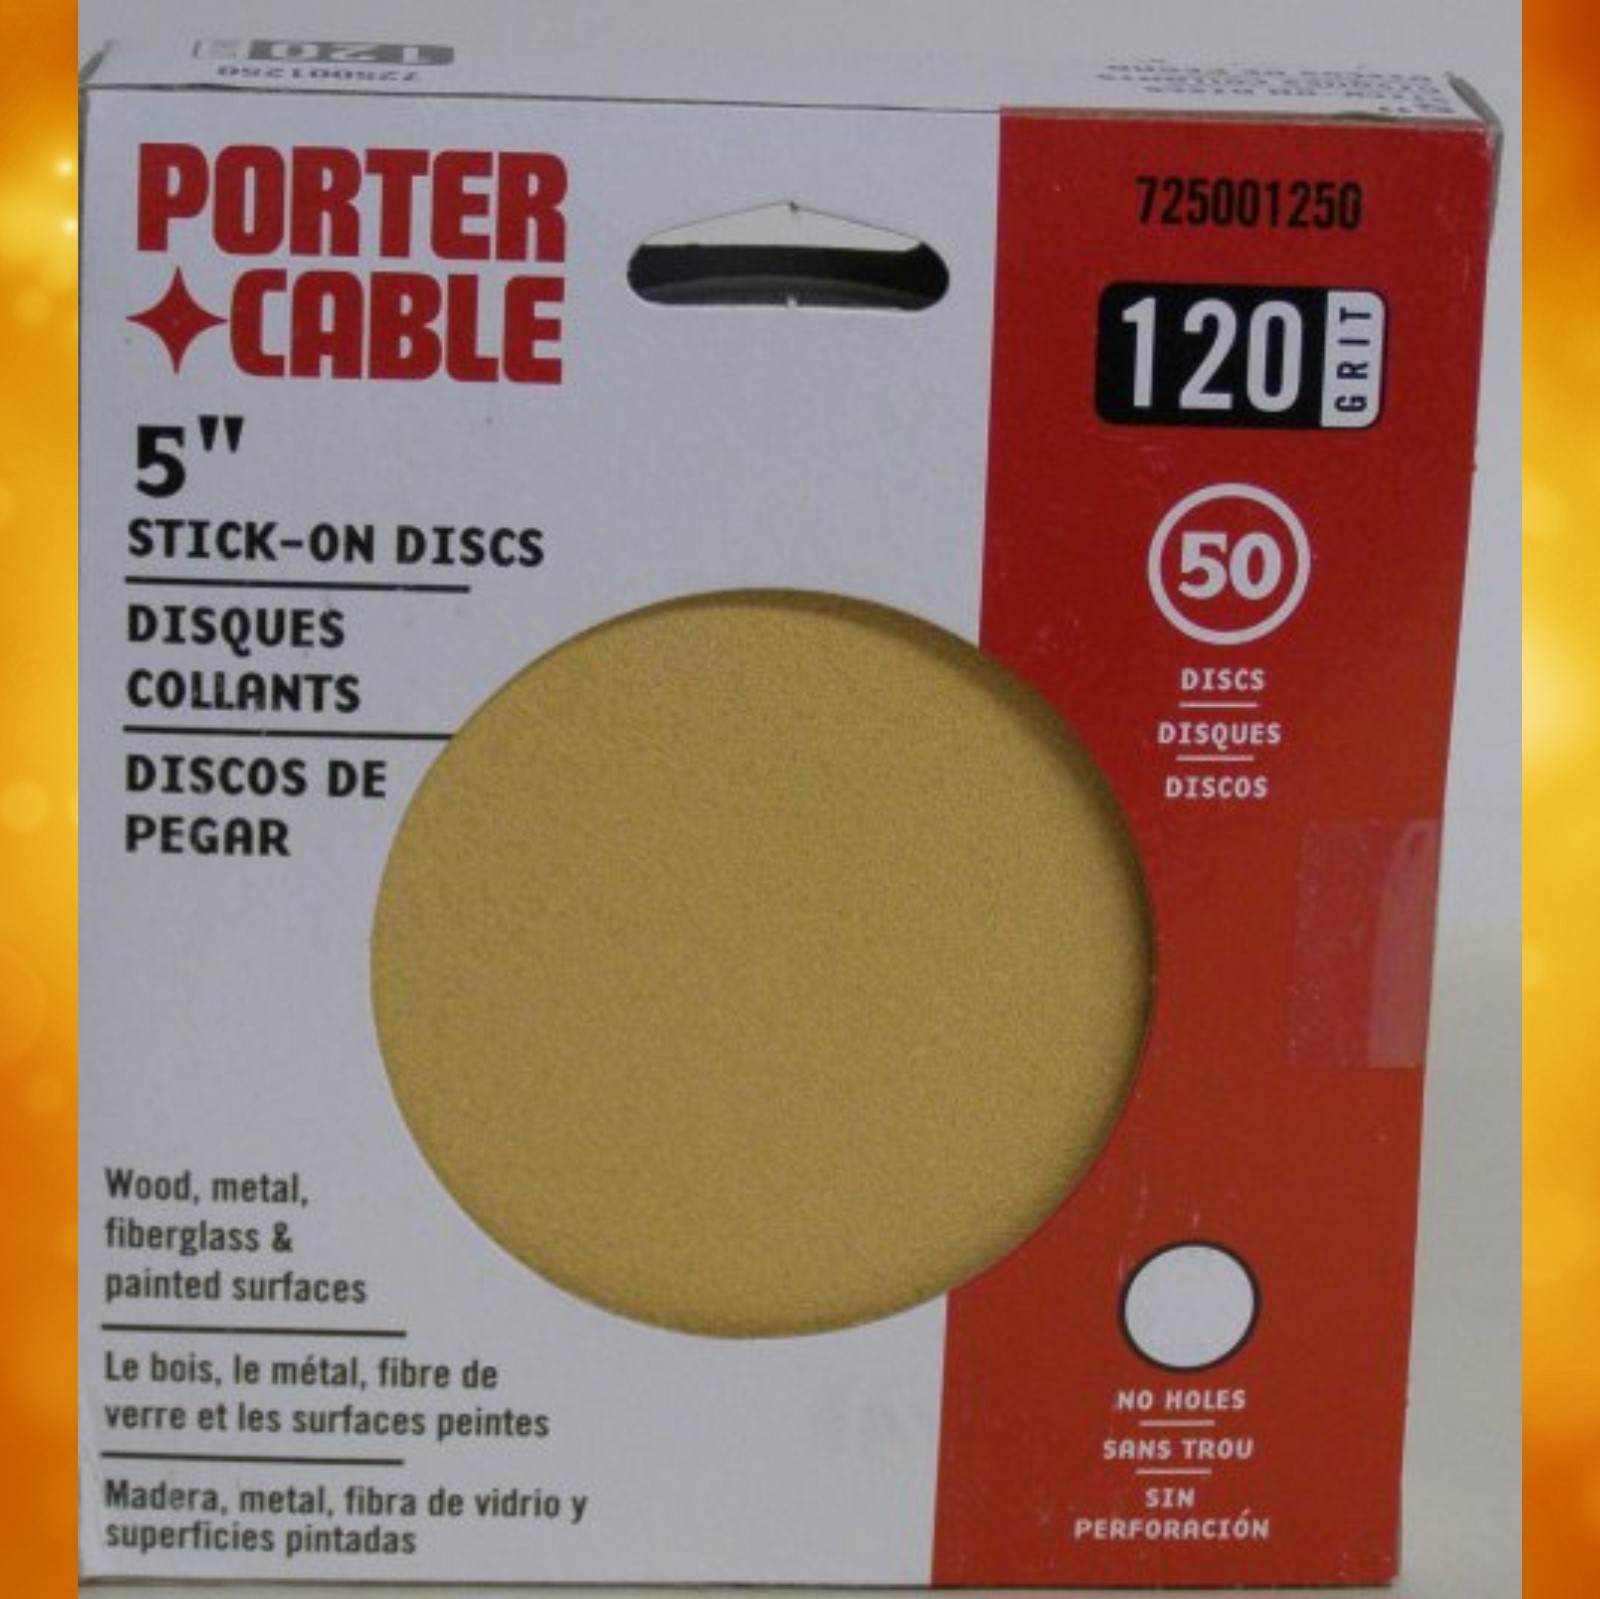 725001250 Porter-Cable 5" No-Hole, Adhesive-Backed Sanding Discs - 120 Grit (50 Pack) 725001250